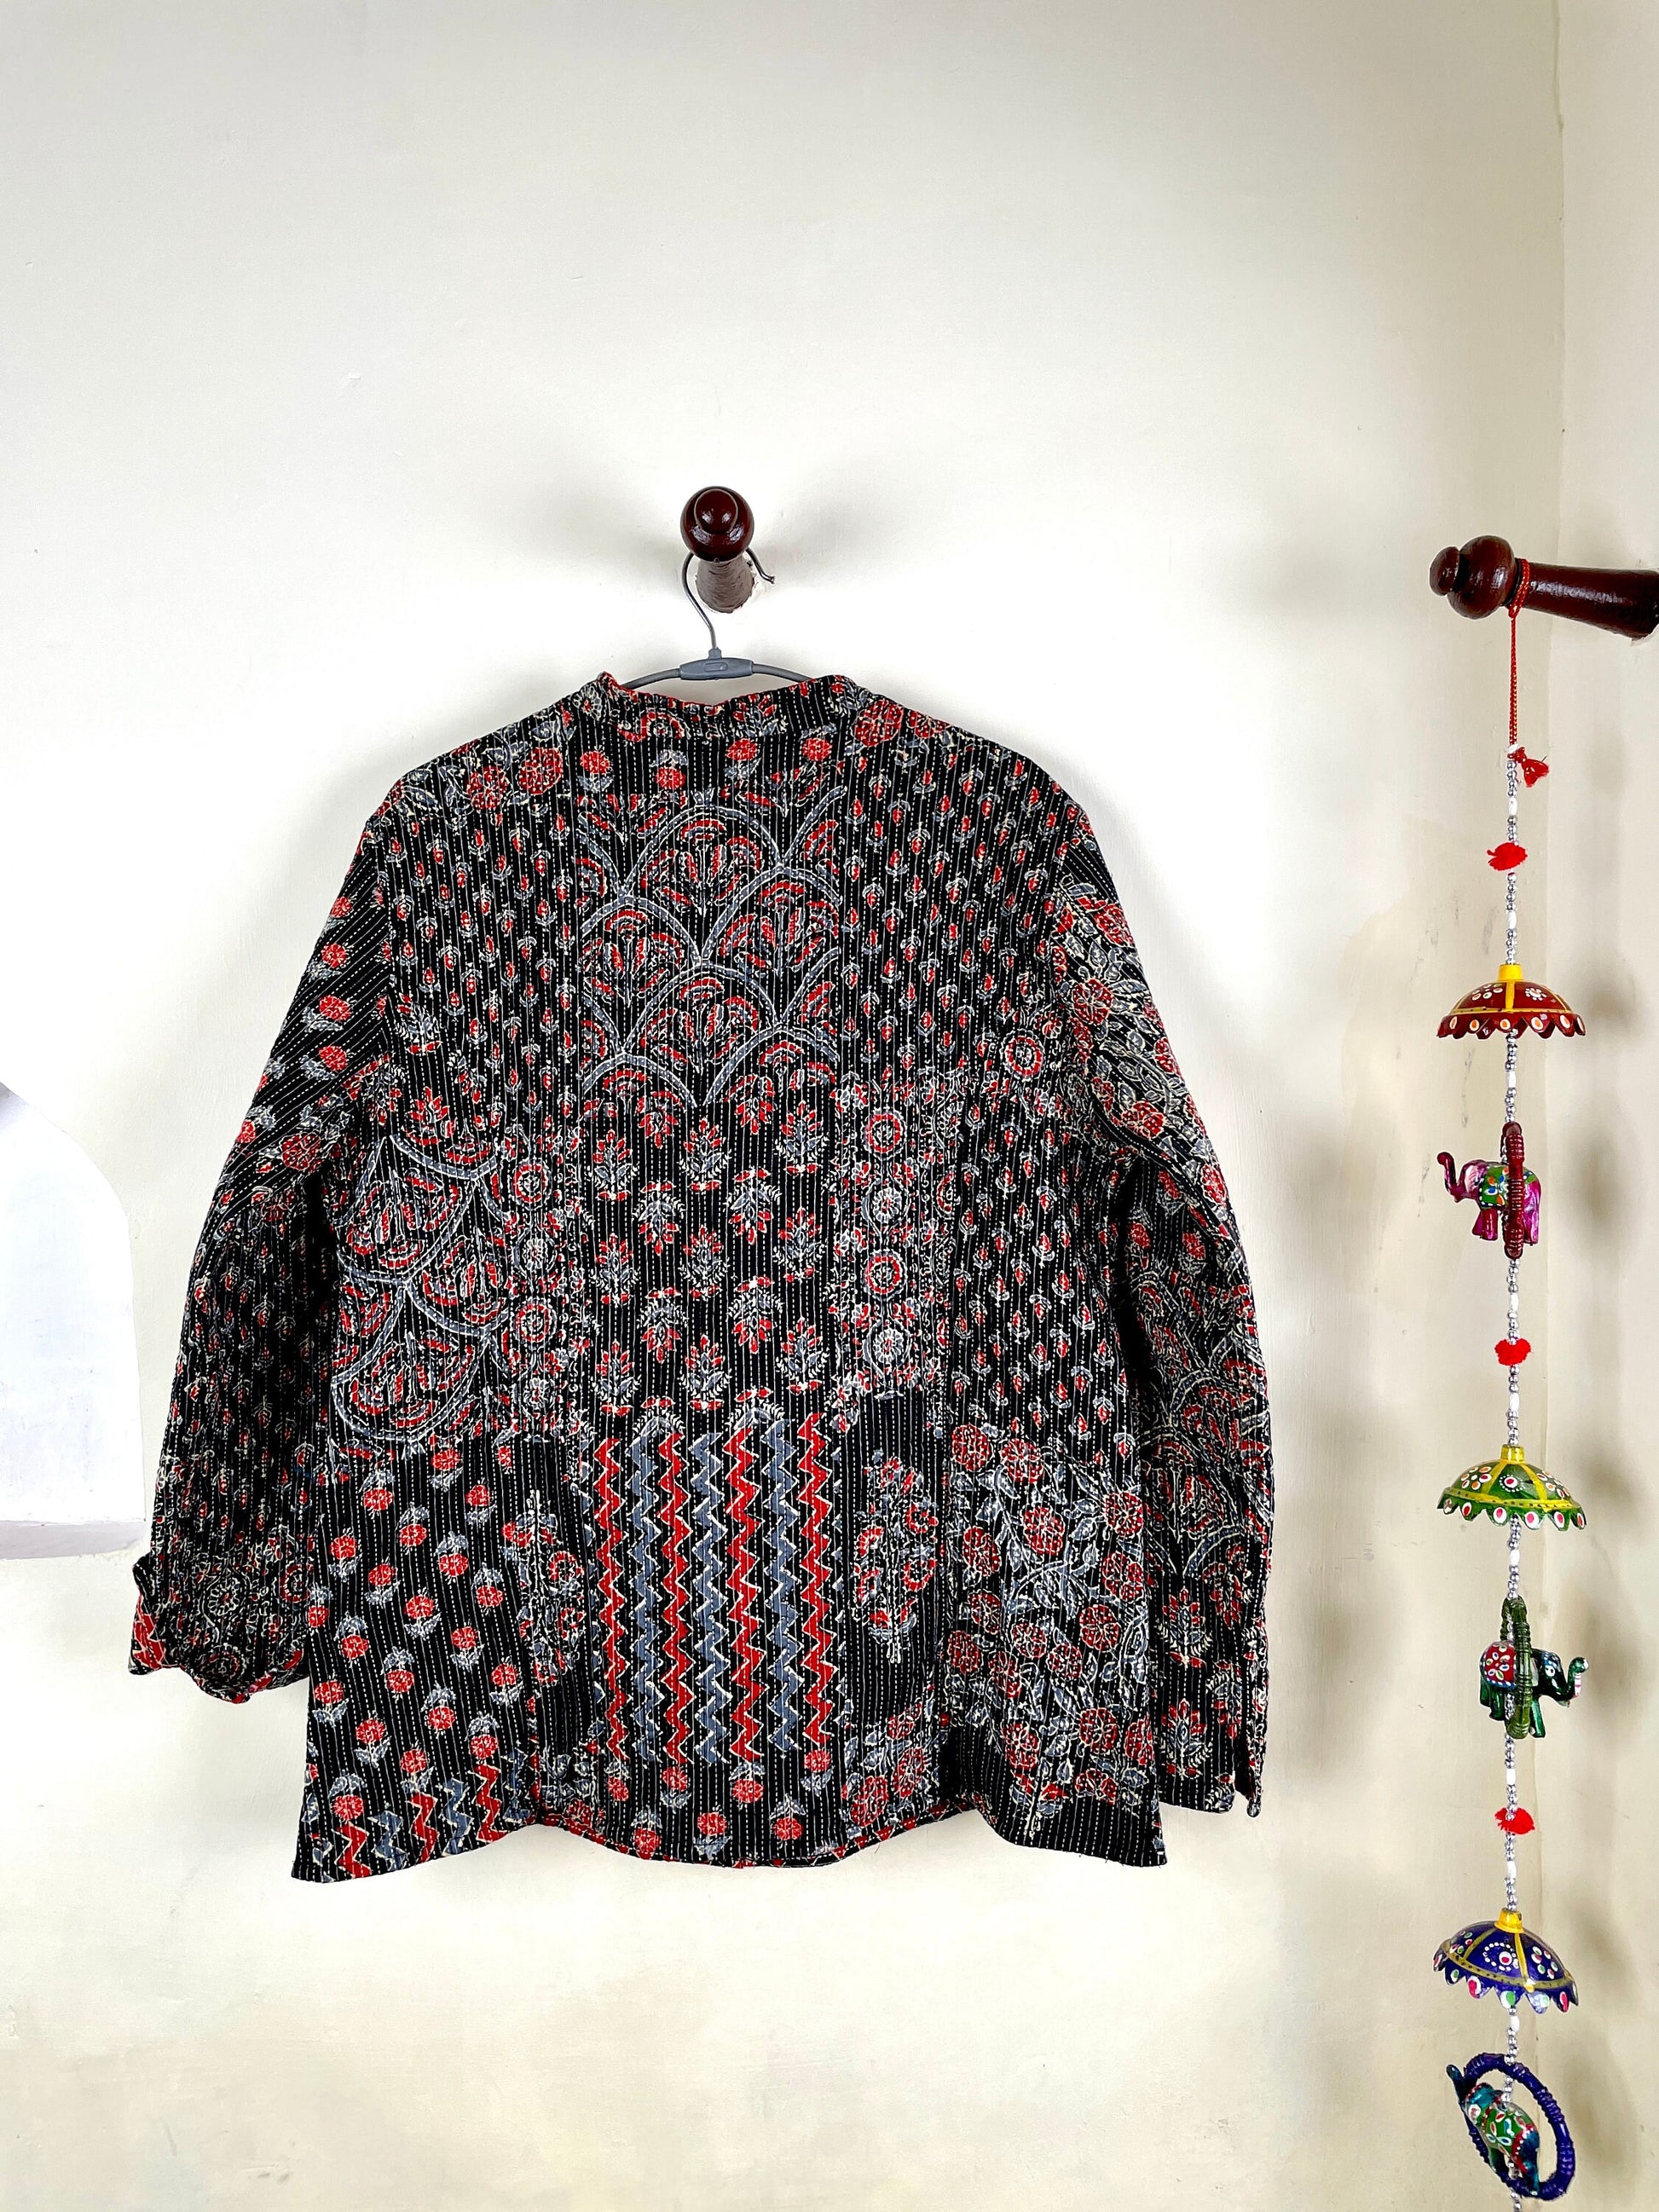 Indian Handmade Quilted Kantha Cotton Fabric Jacket Stylish Black & Red Floral Women's Coat, Reversible Waistcoat for Her